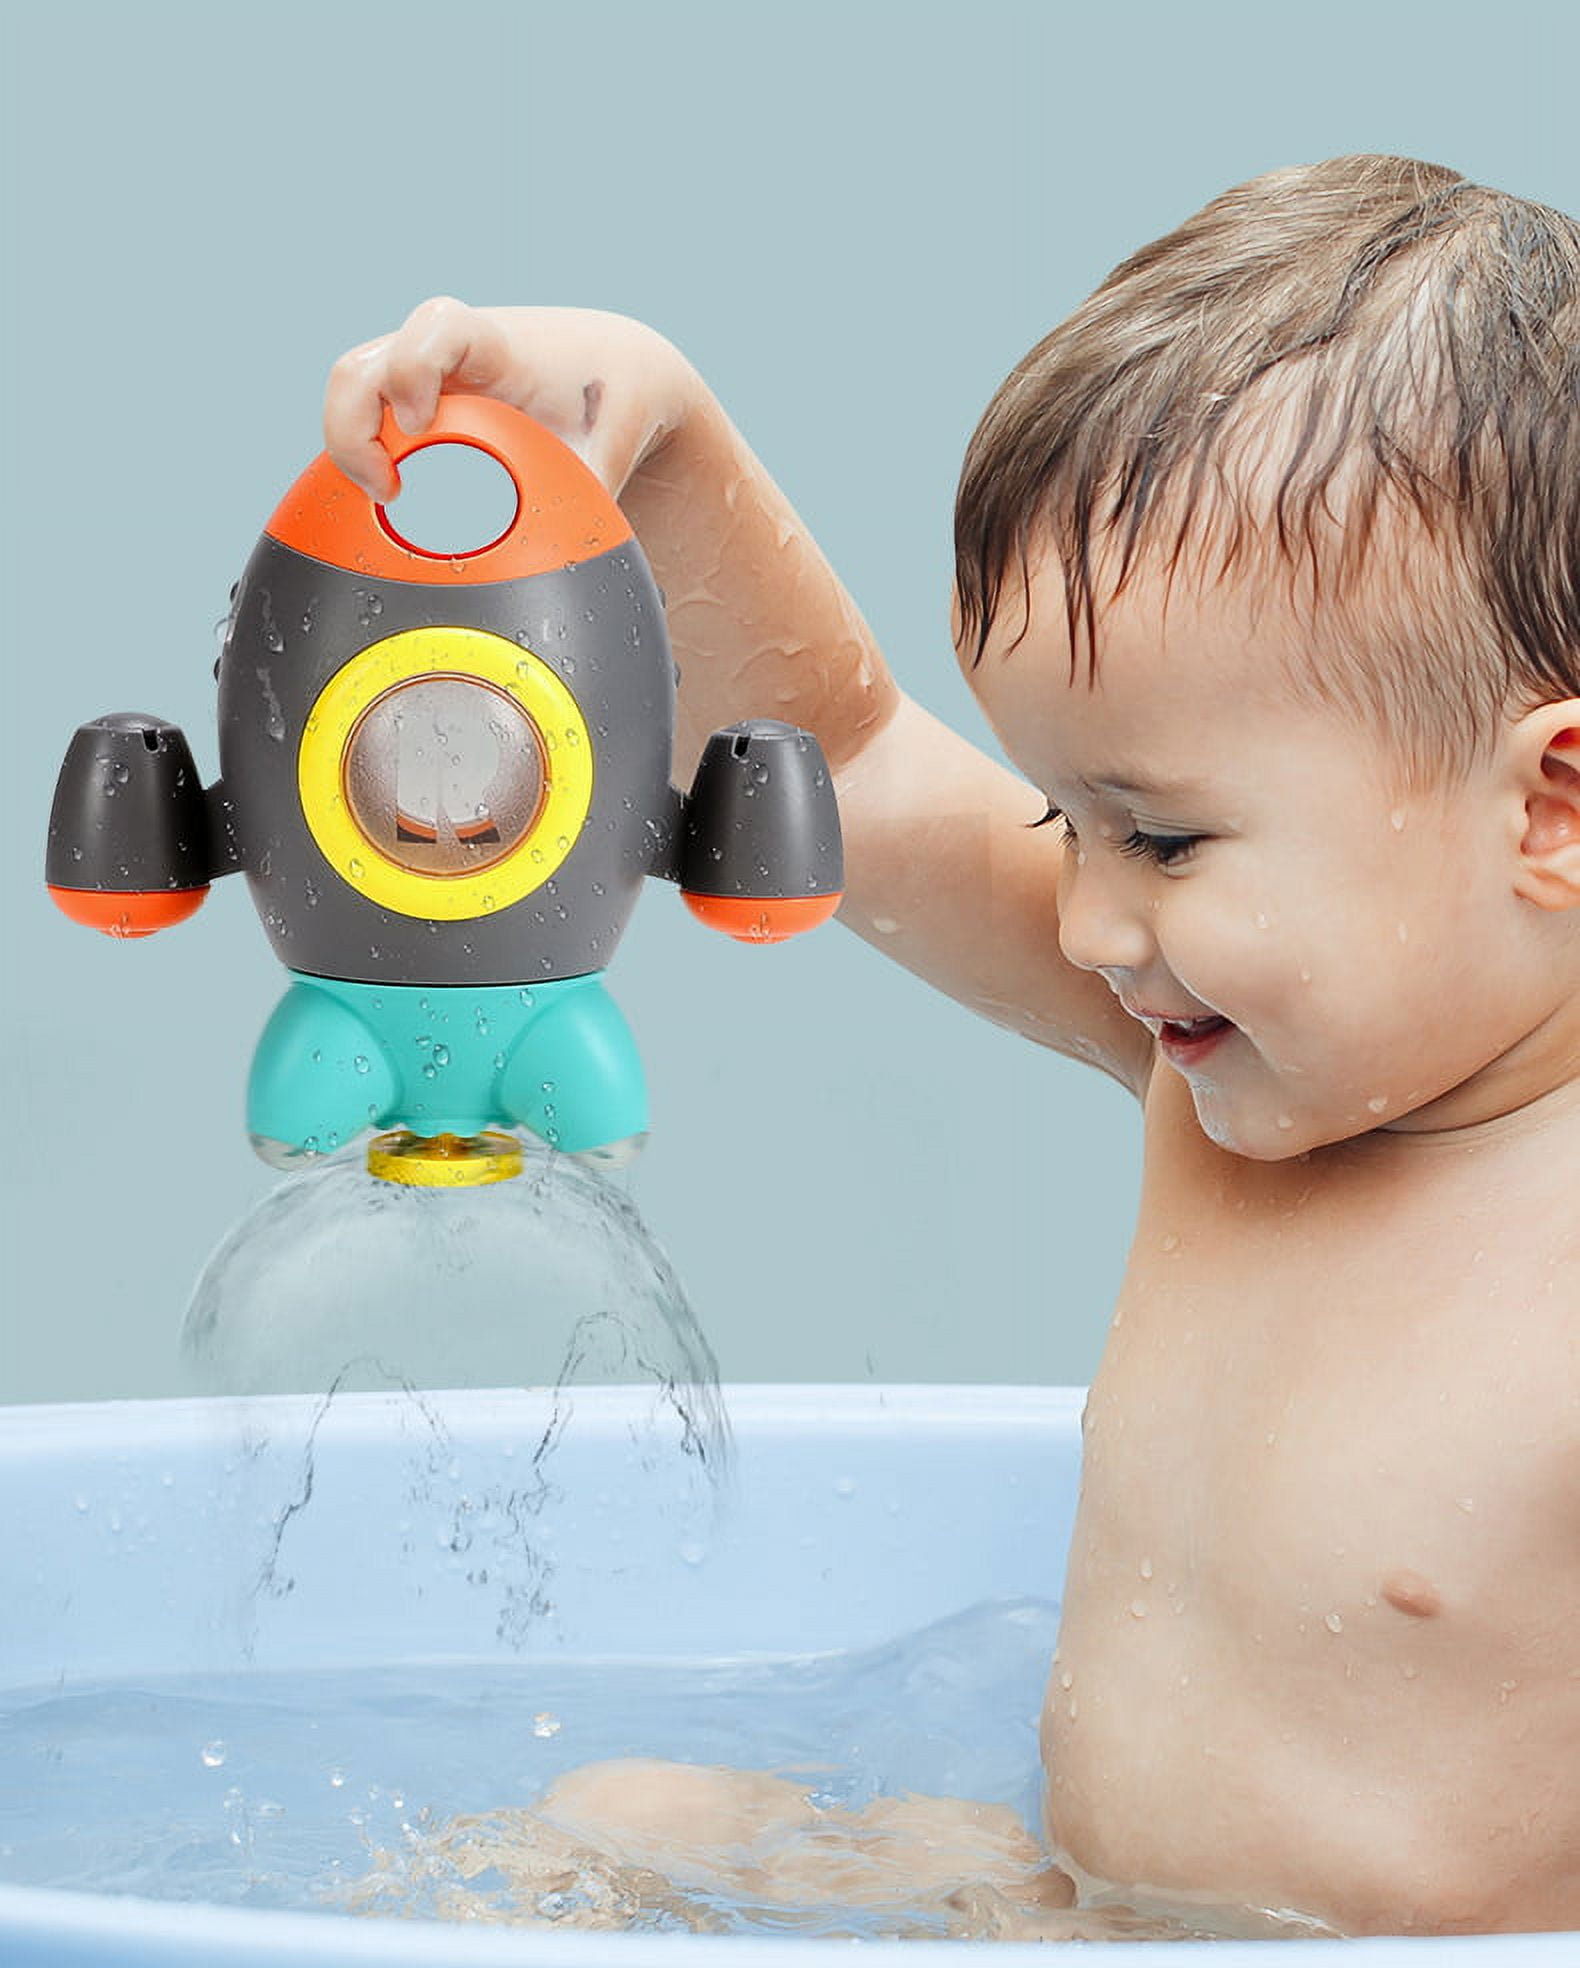 HEMRLY Bath Toys, Bath Toys for Toddlers Space Rocket, Baby Bath Toy  Rotating Spray Water for Baby, Girls and Boys Toddler Bath Toys- Grey, 6pcs  Wild